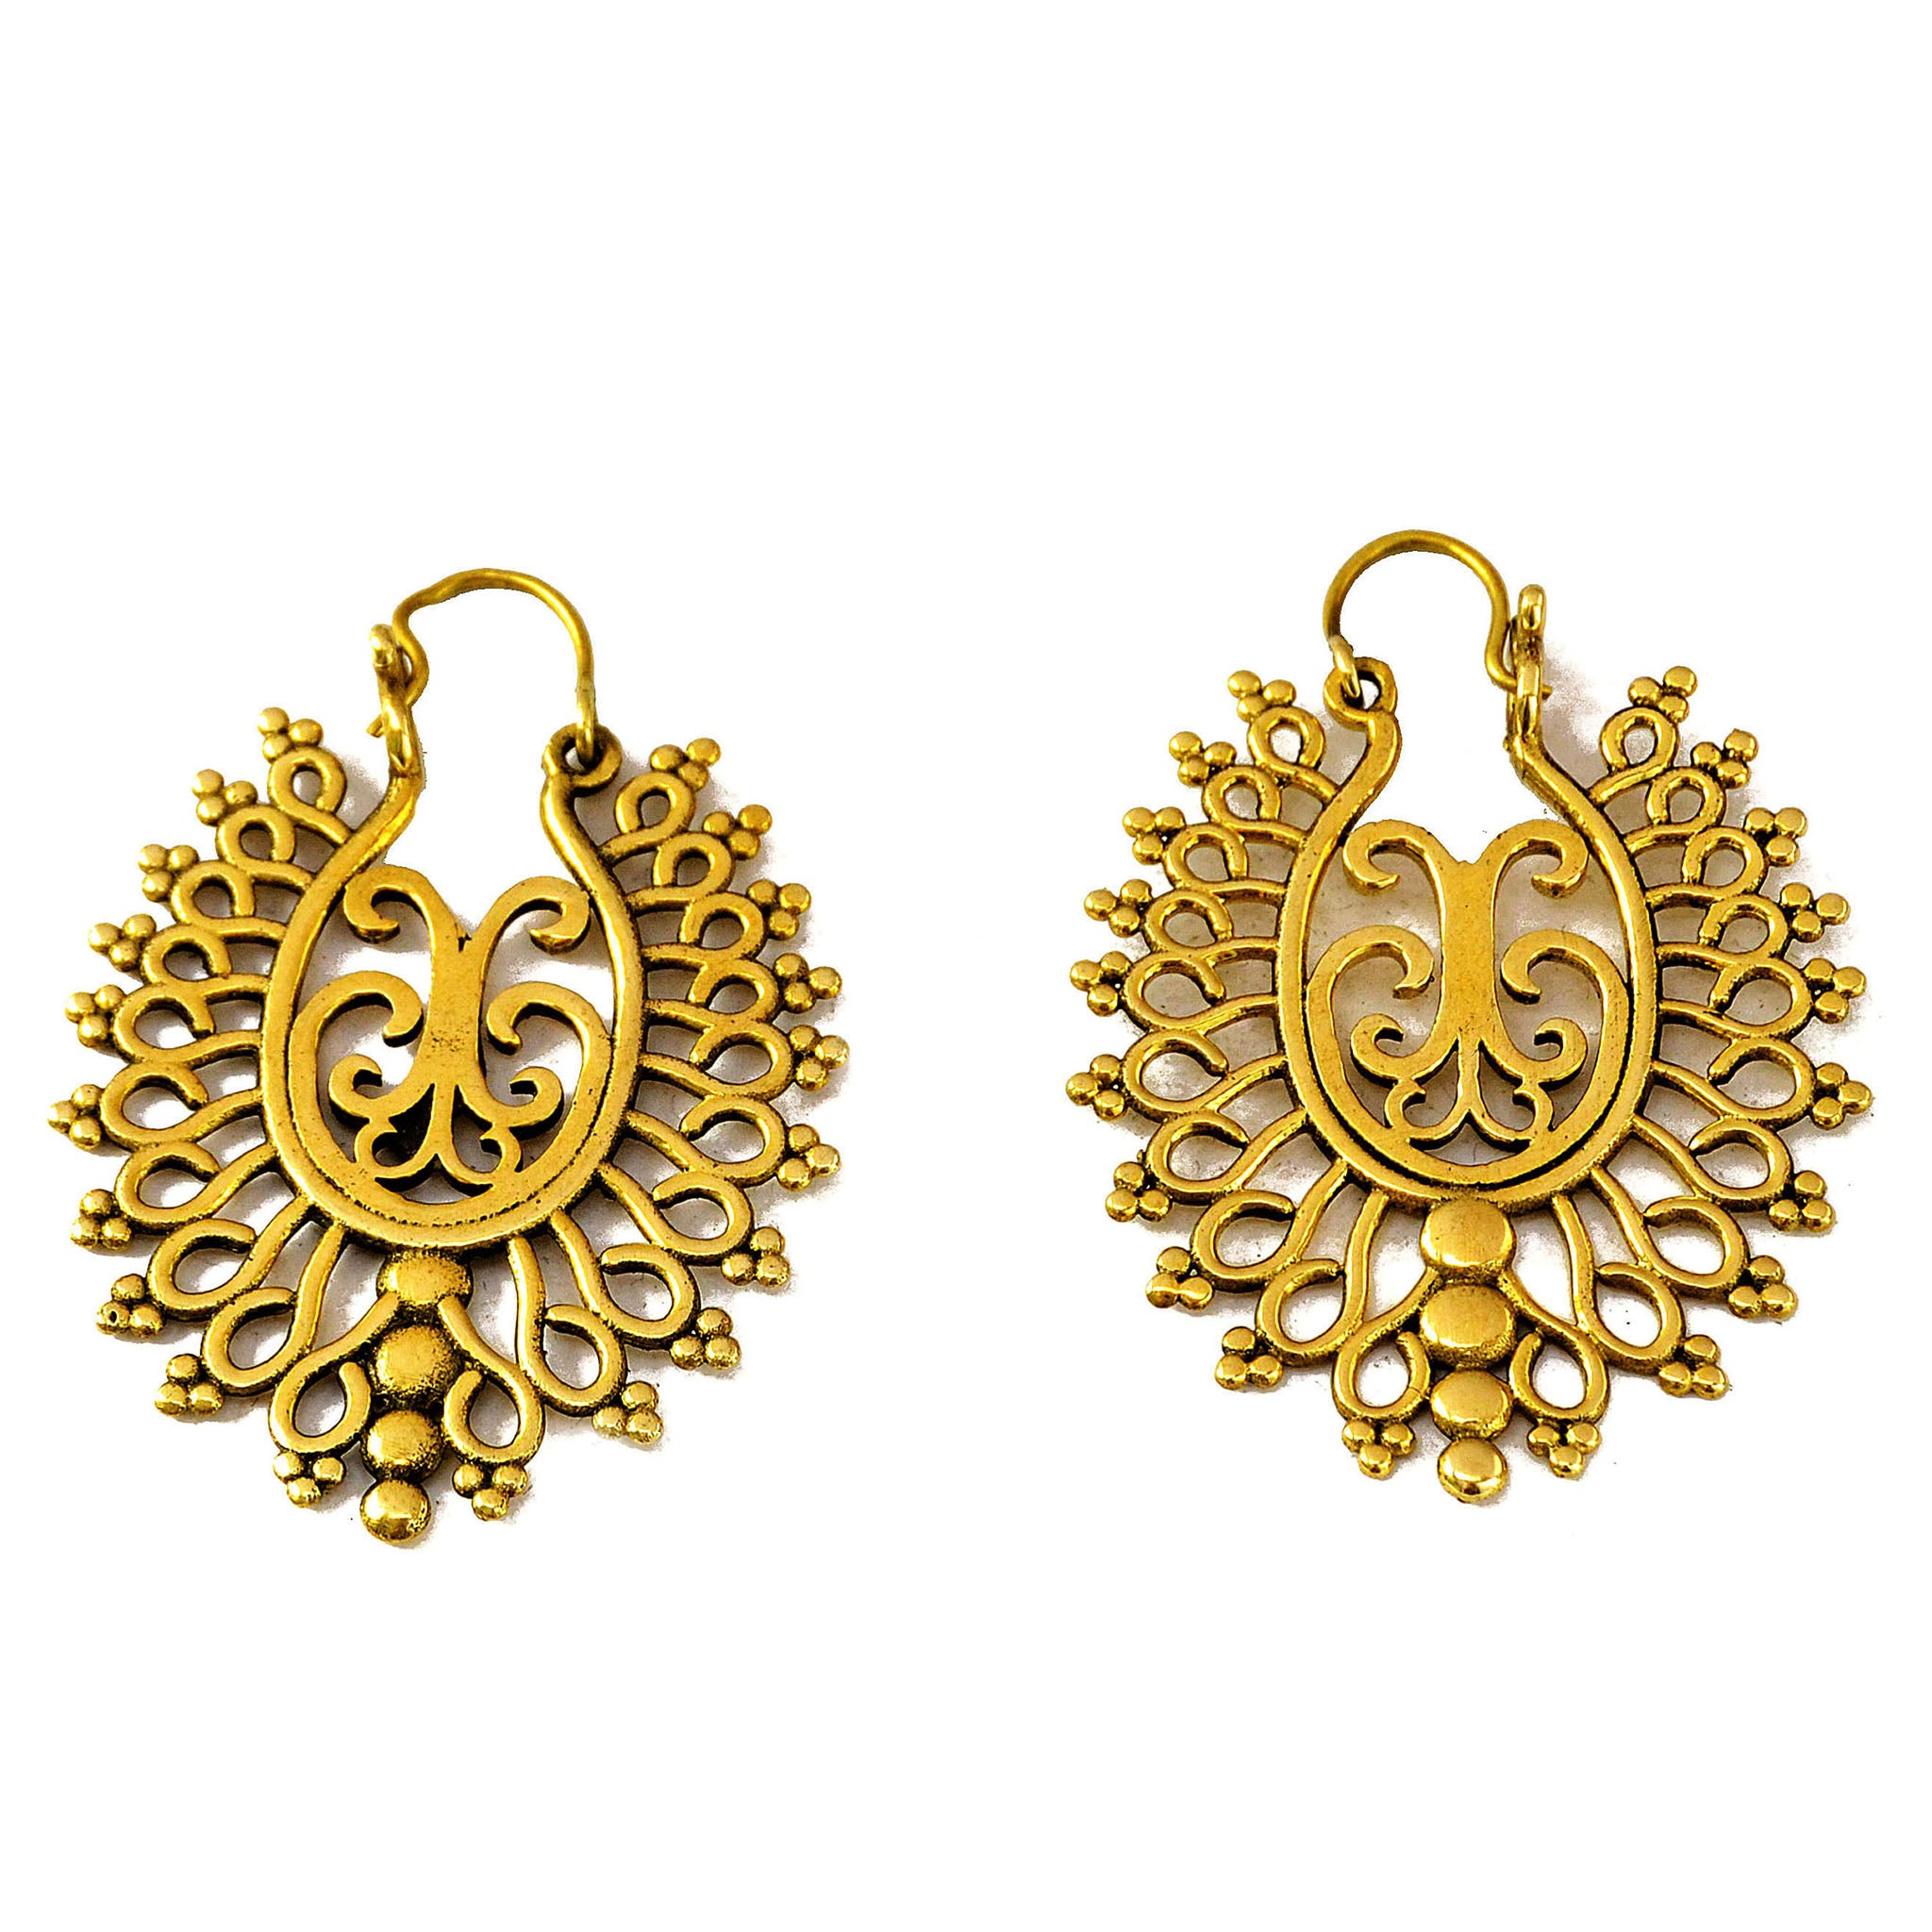 Antique indian earrings